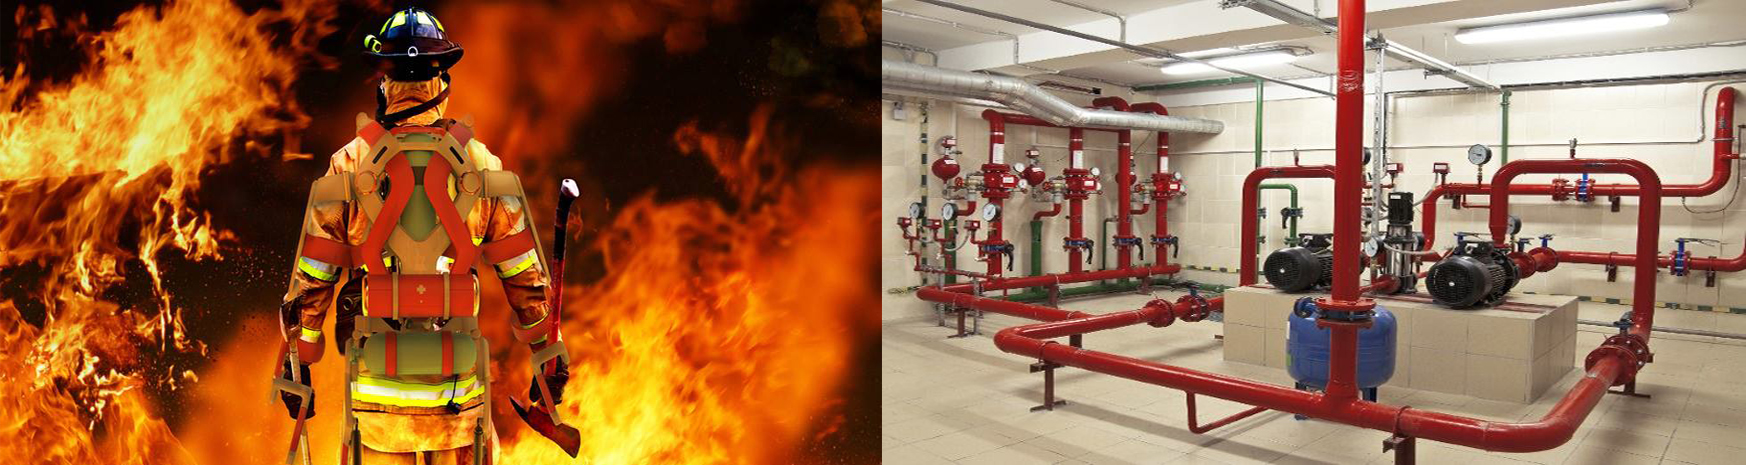 Fire safety systems